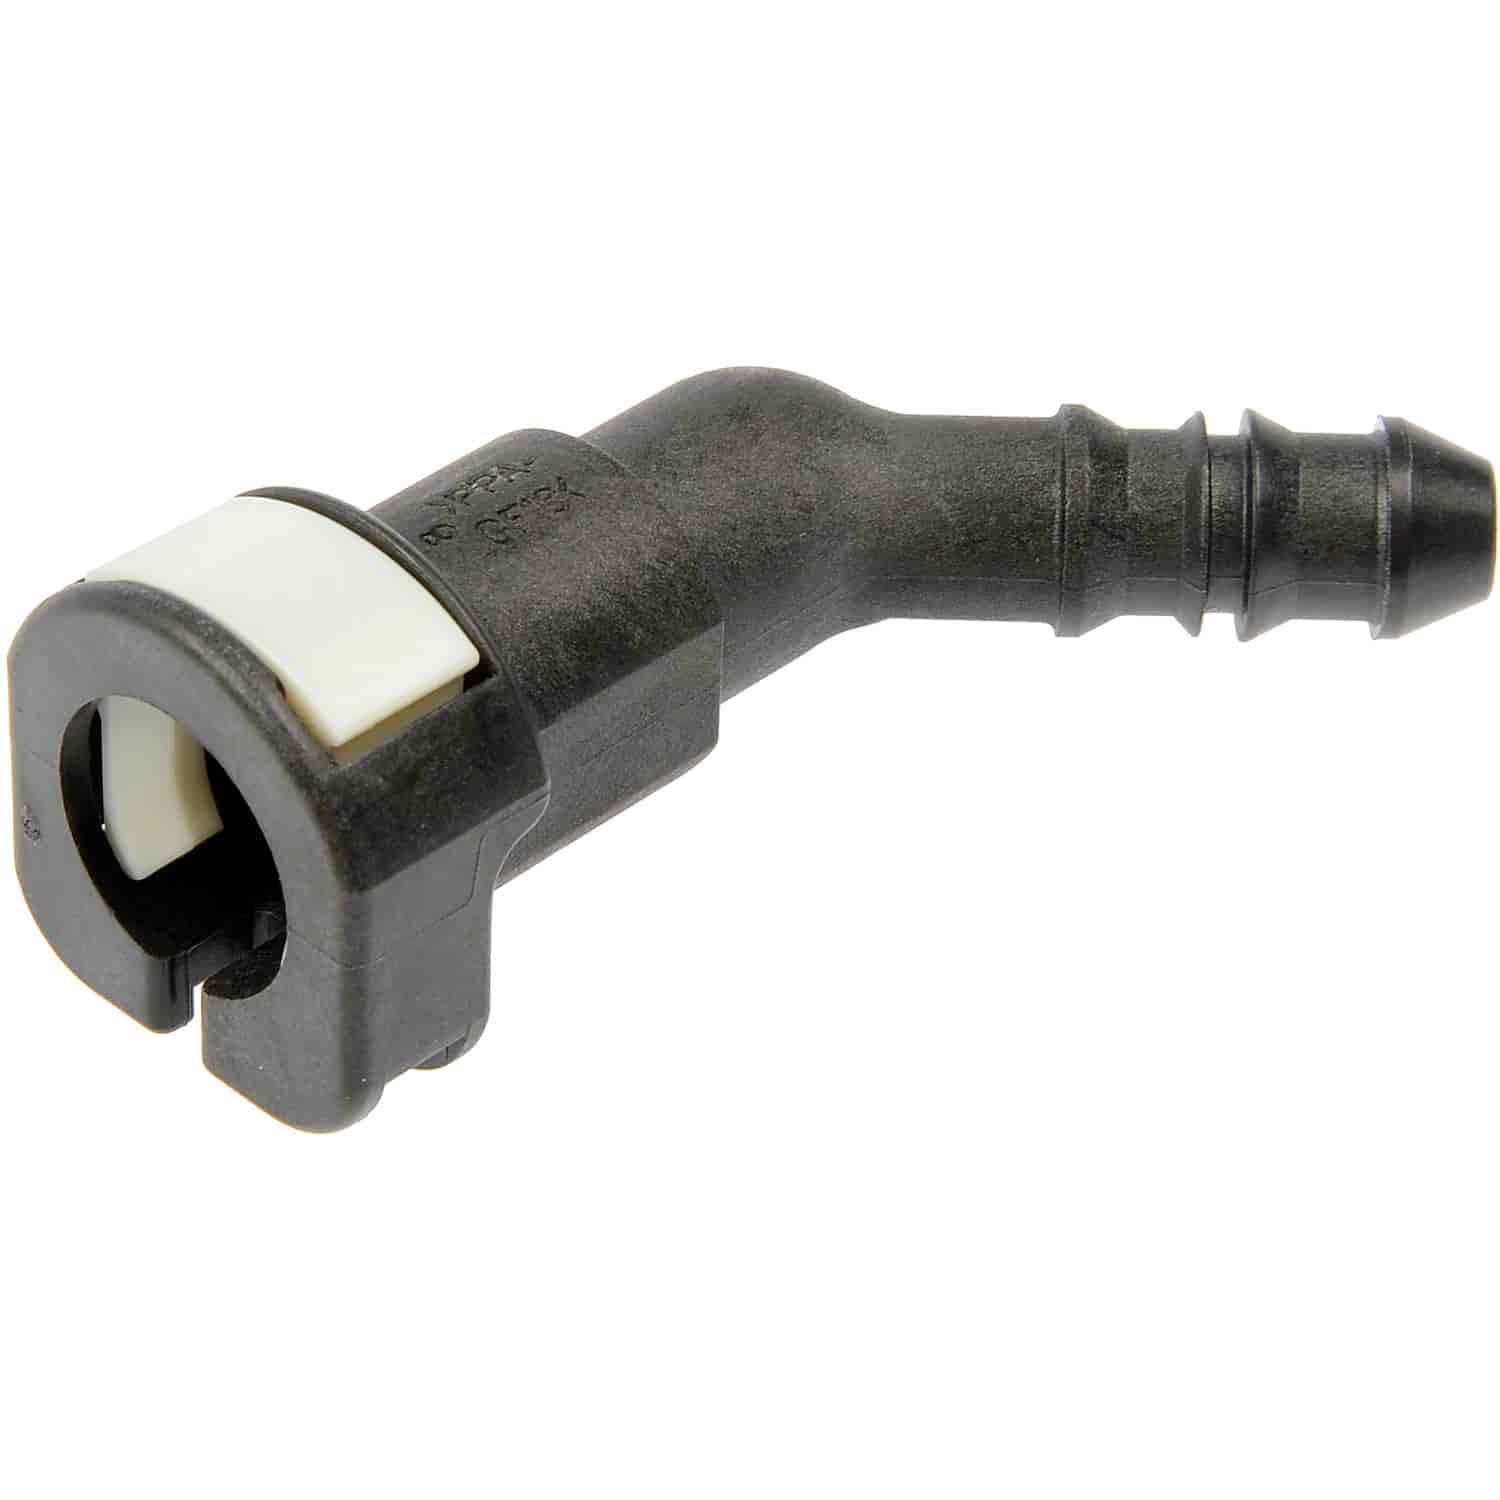 Fuel Line Retaining Clip 5/16 in. Steel to 5/16 in. Nylon [45 Degree]